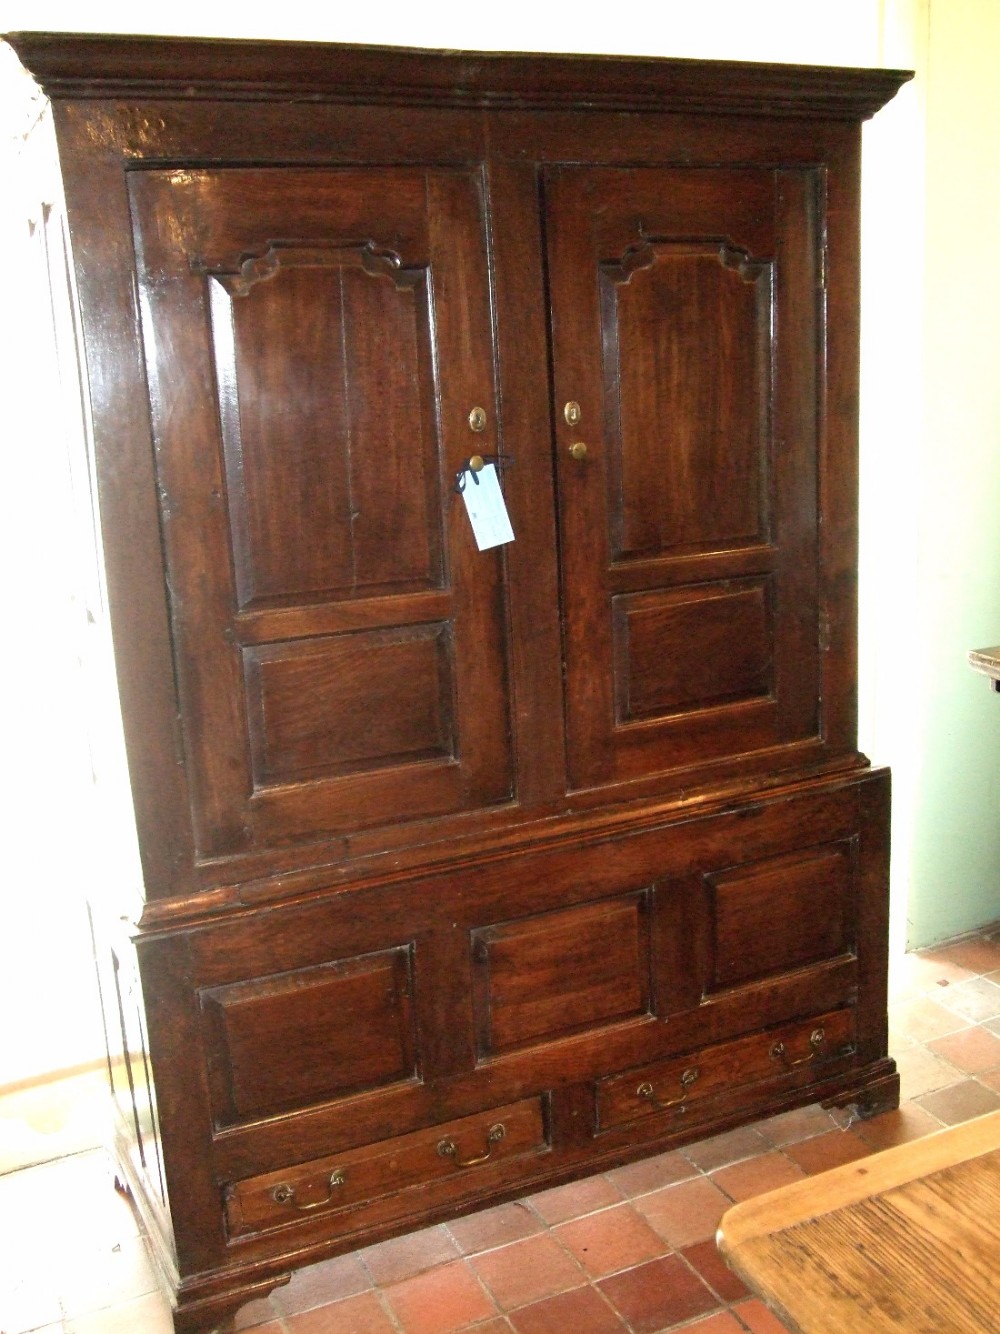 18th century oak press or livery cupboard with two small drawers